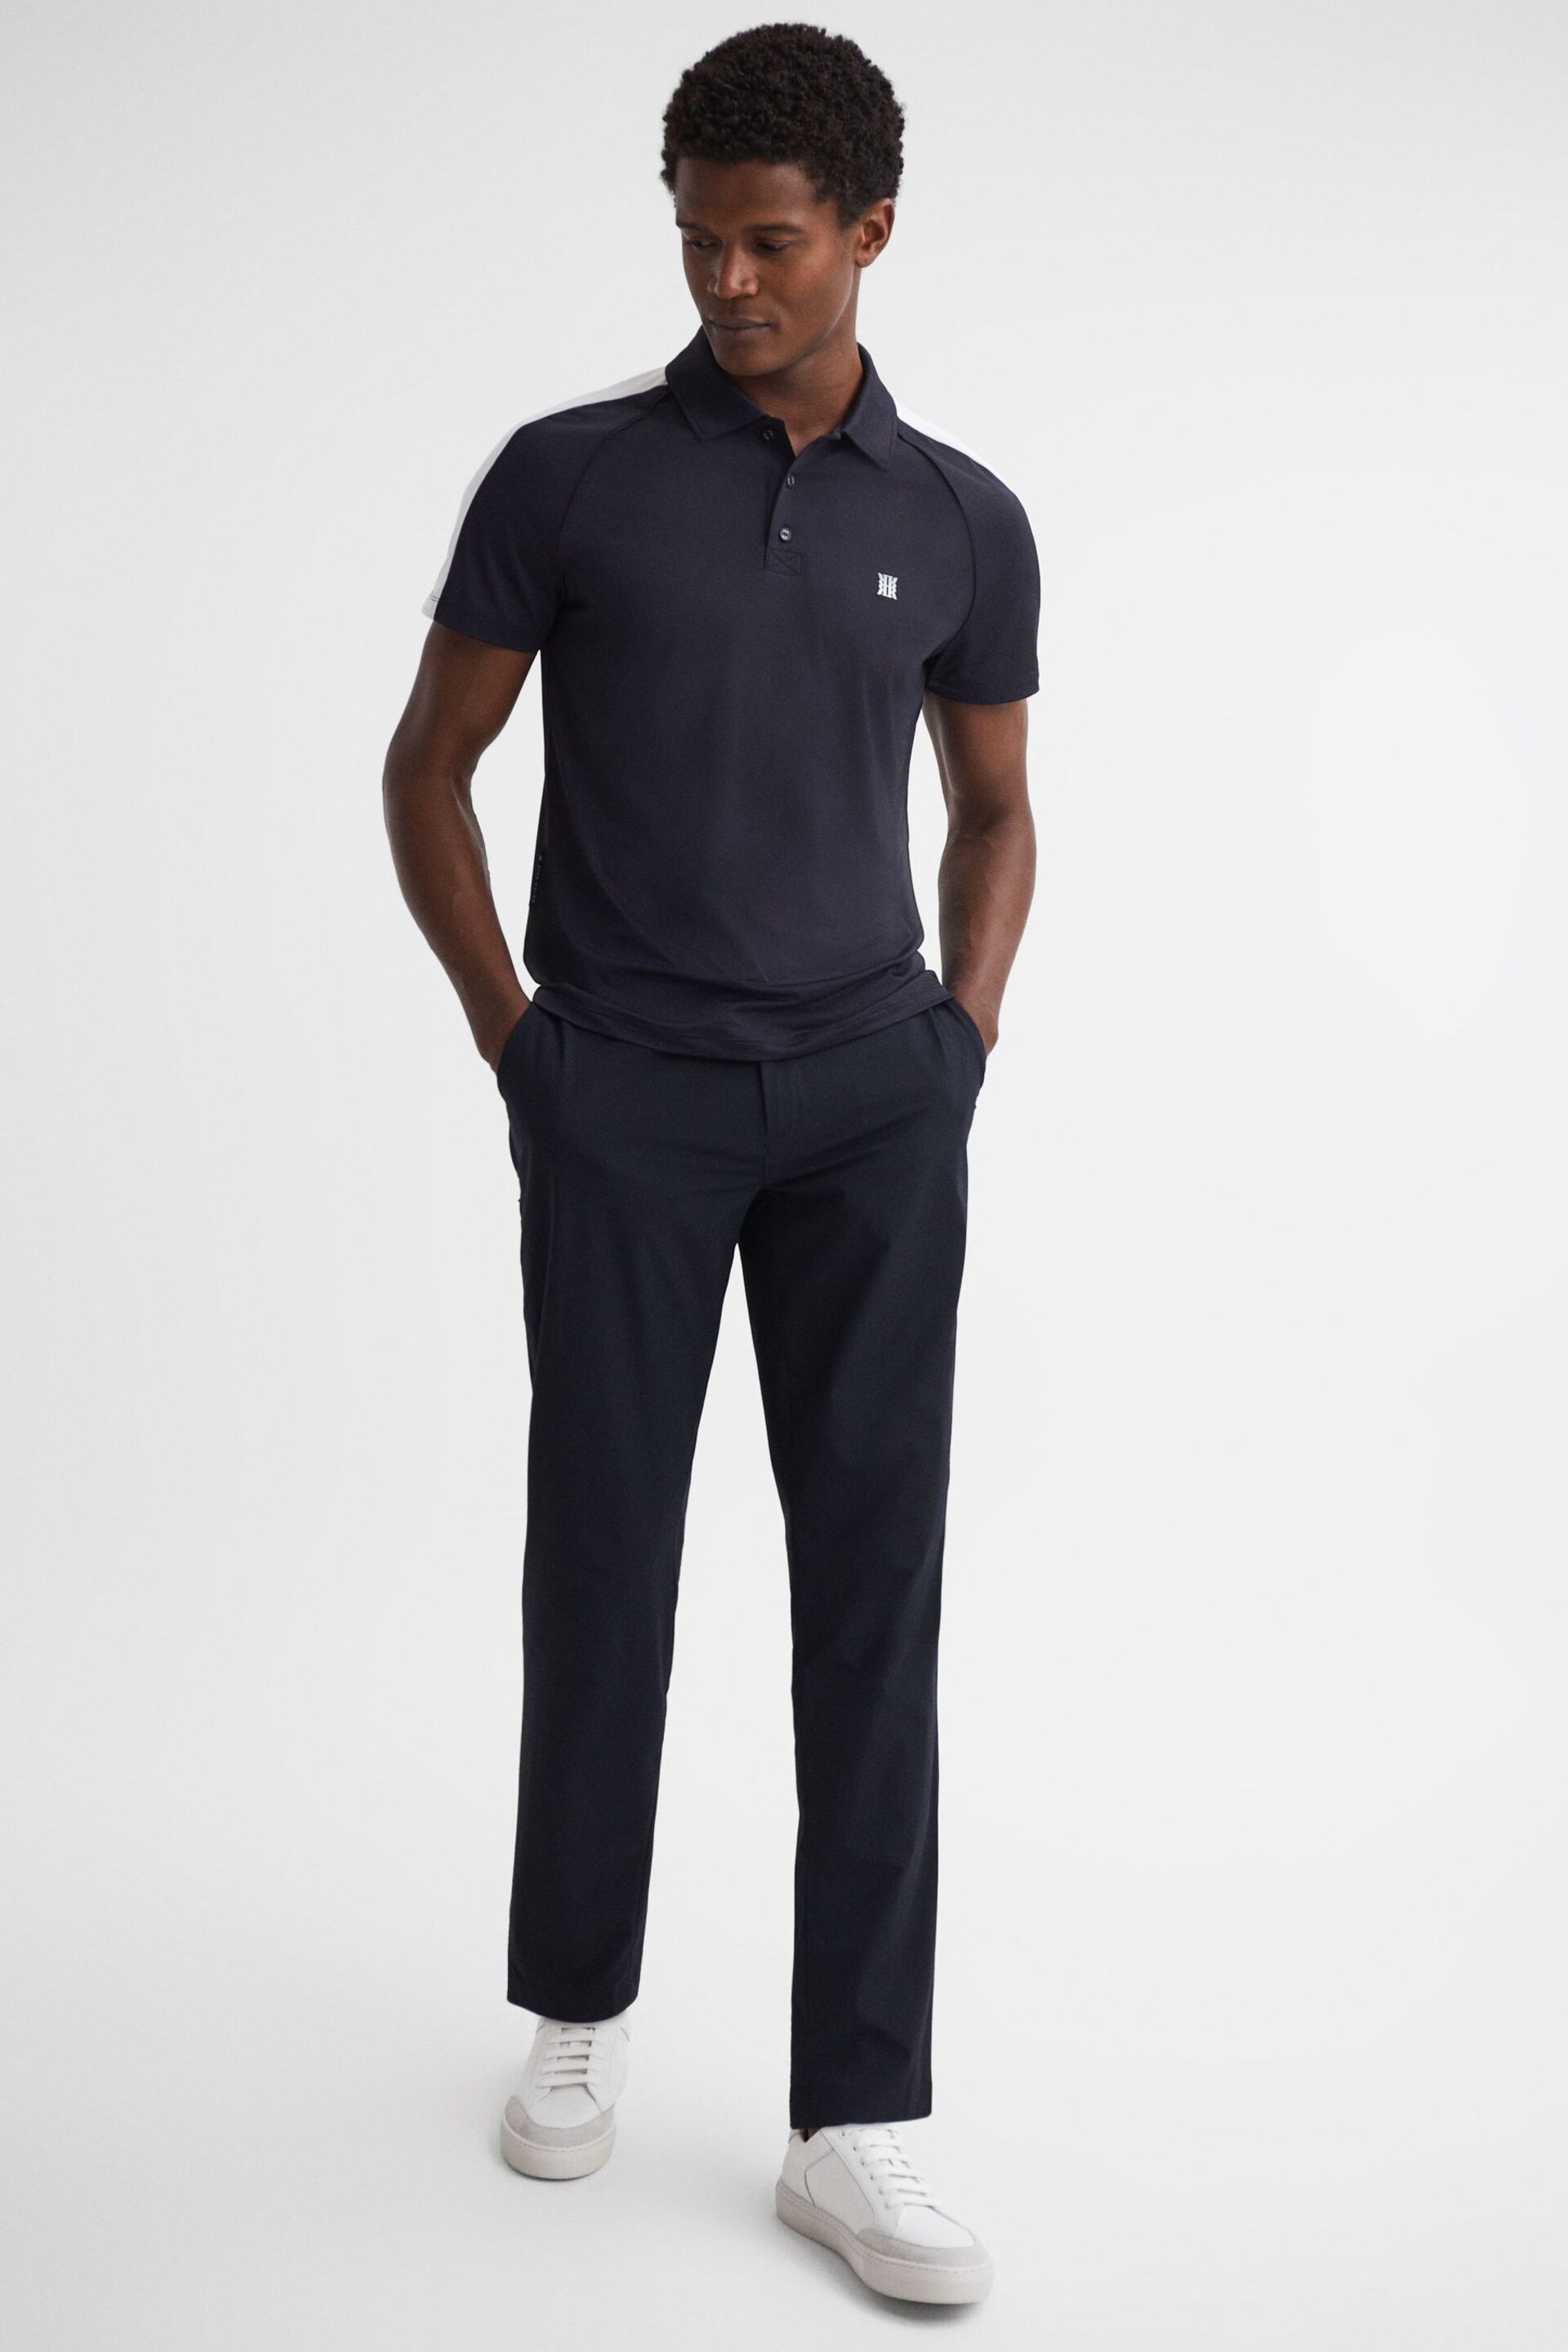 Reiss Navy/White Camberley Golf Airtech Slim Fit Polo Shirt - Image 3 of 4